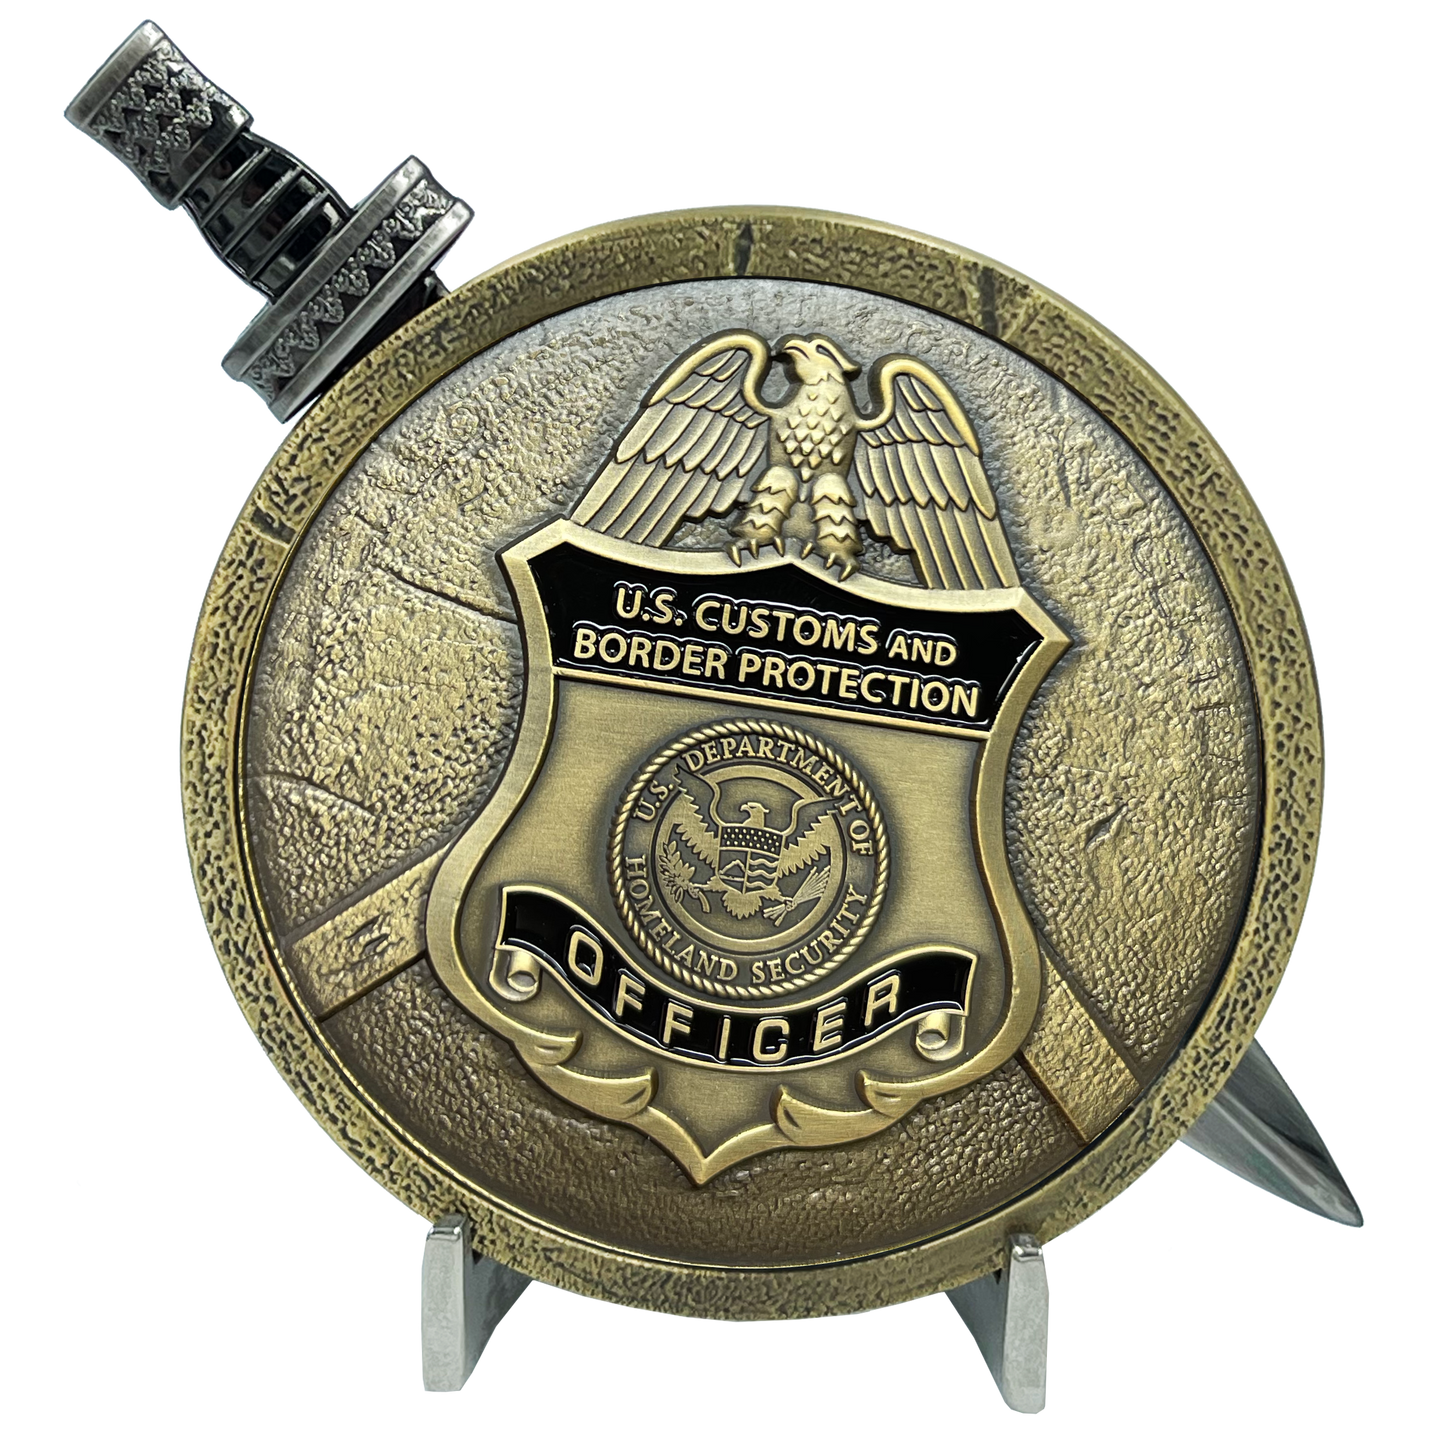 EL4-018 CBP officer Field Ops Shield with removable Sword Challenge Coin Set Field Operations CBPO